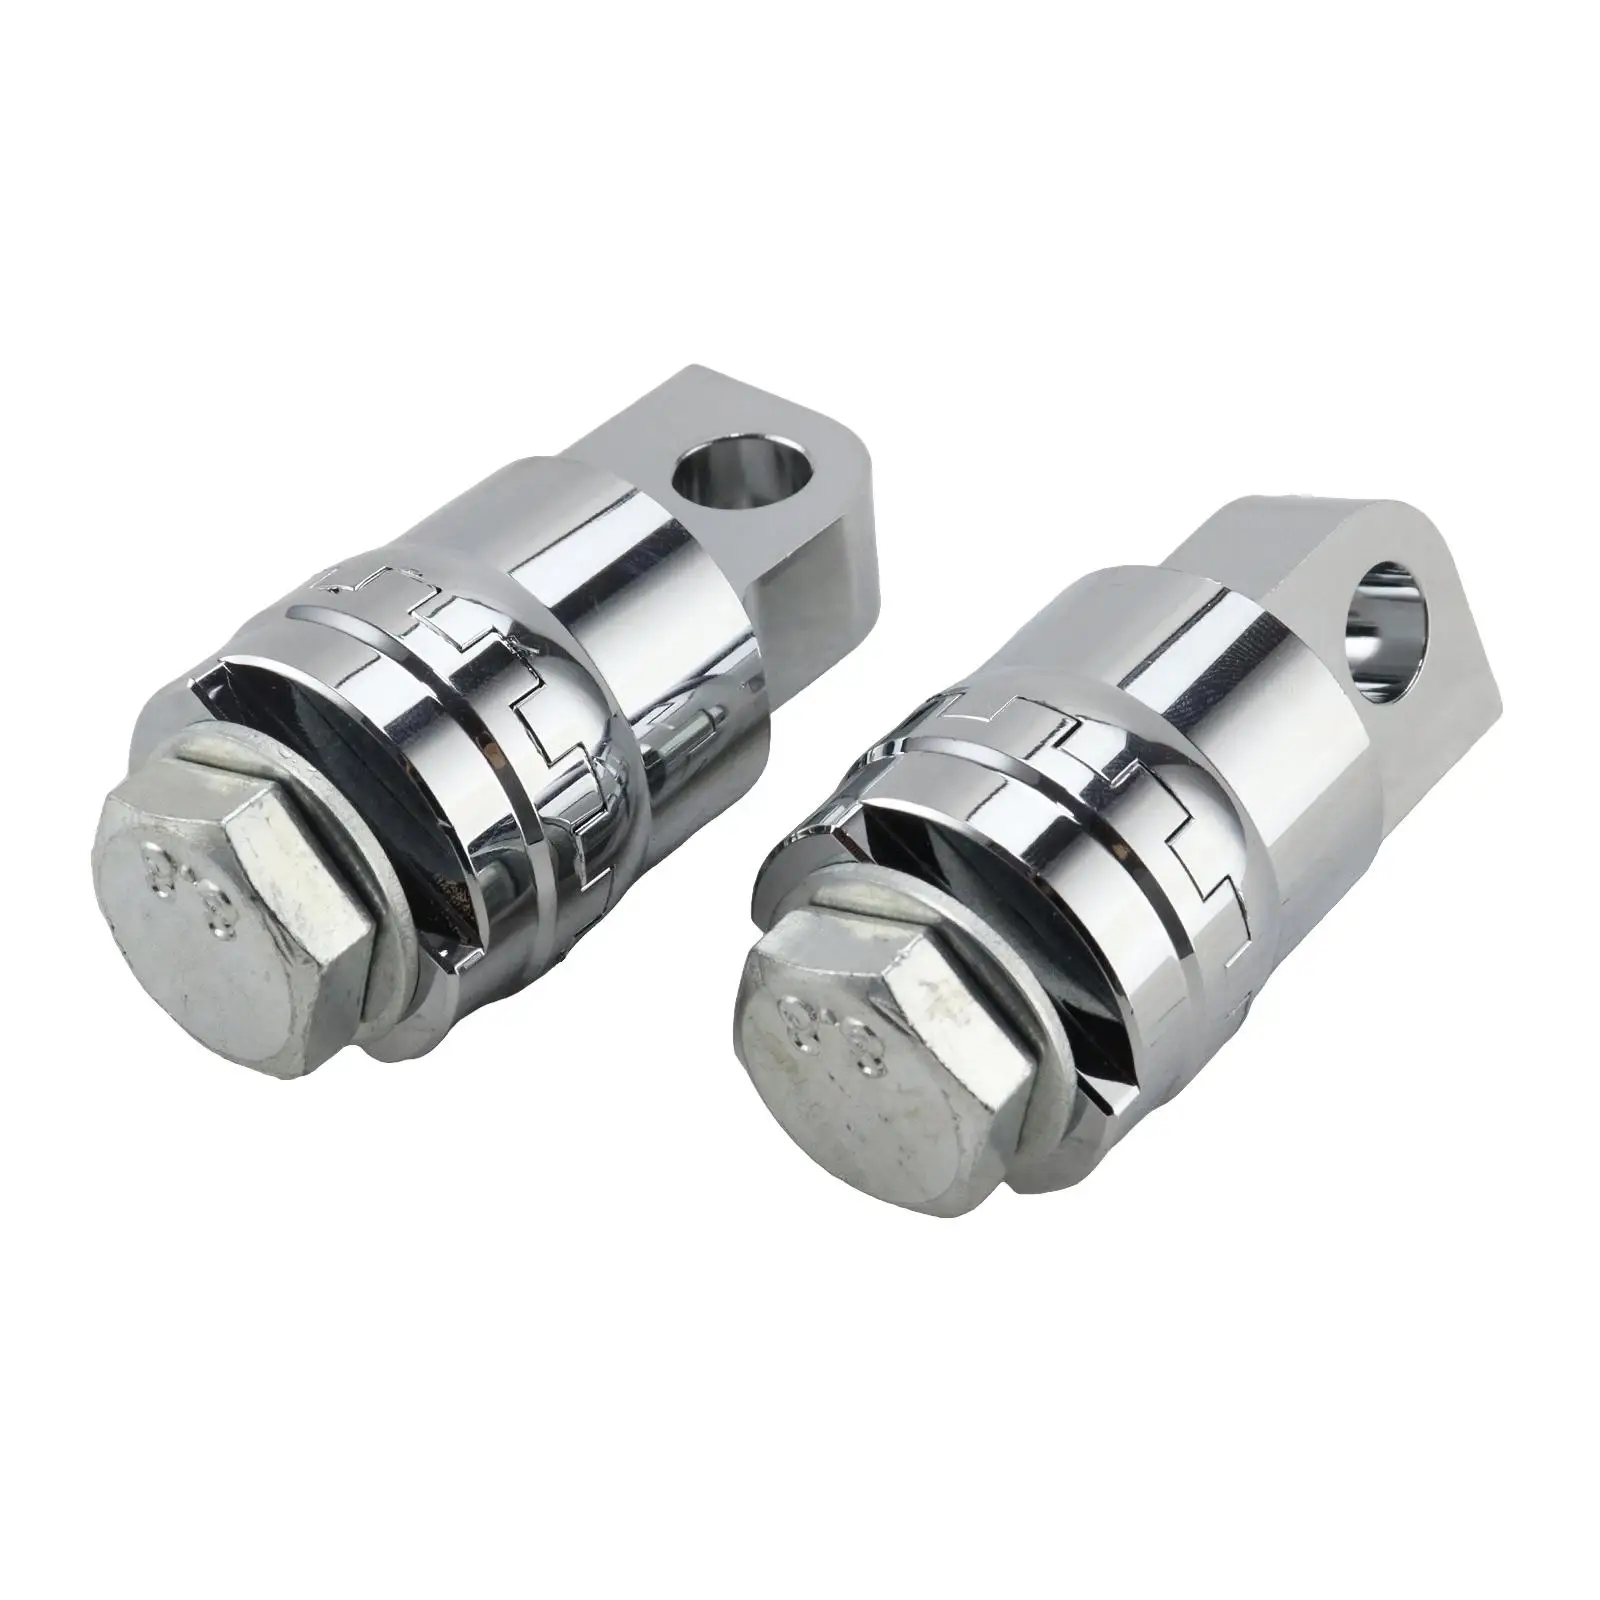 

2Pcs Motorcycle Foot Pegs Male fits Direct Replaces Chrome Premium Easily Install